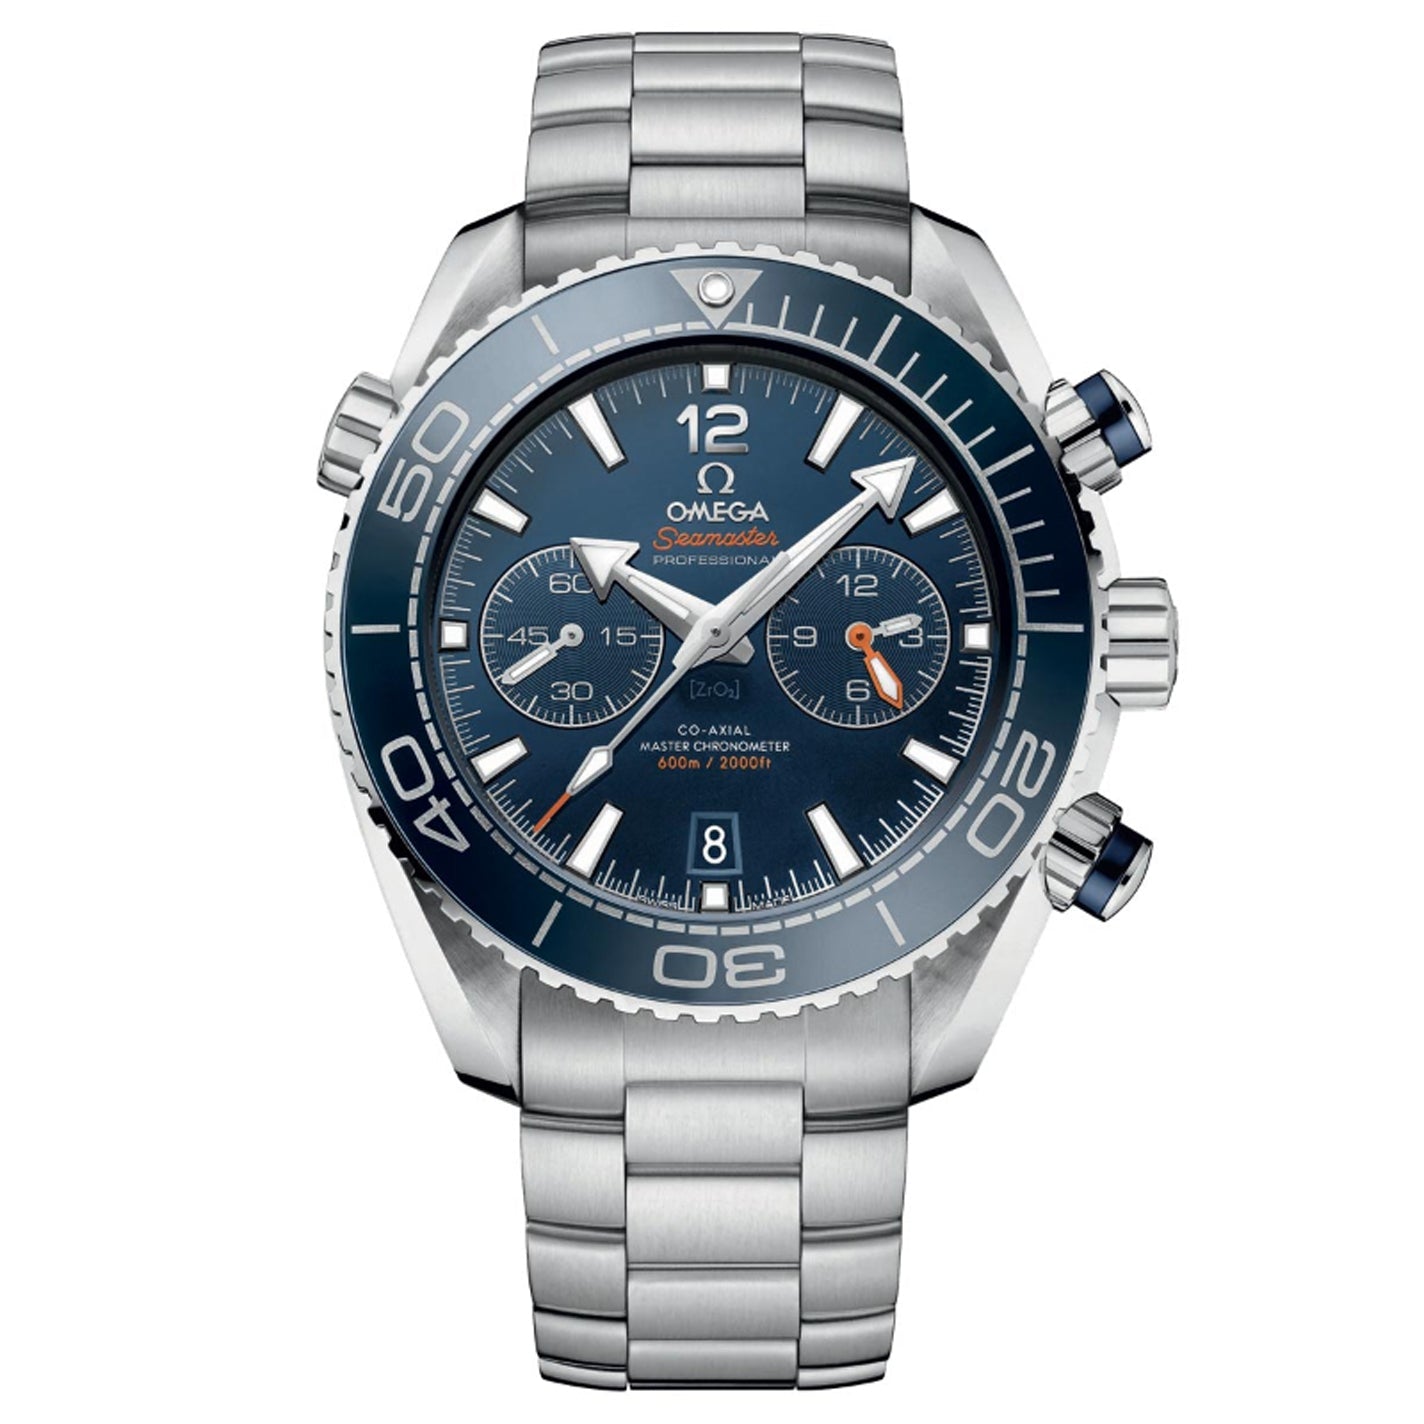 OMEGA Seamaster Planet Ocean 600M Co-Axial Master Chronometer Chronograph 45.5mm Watch